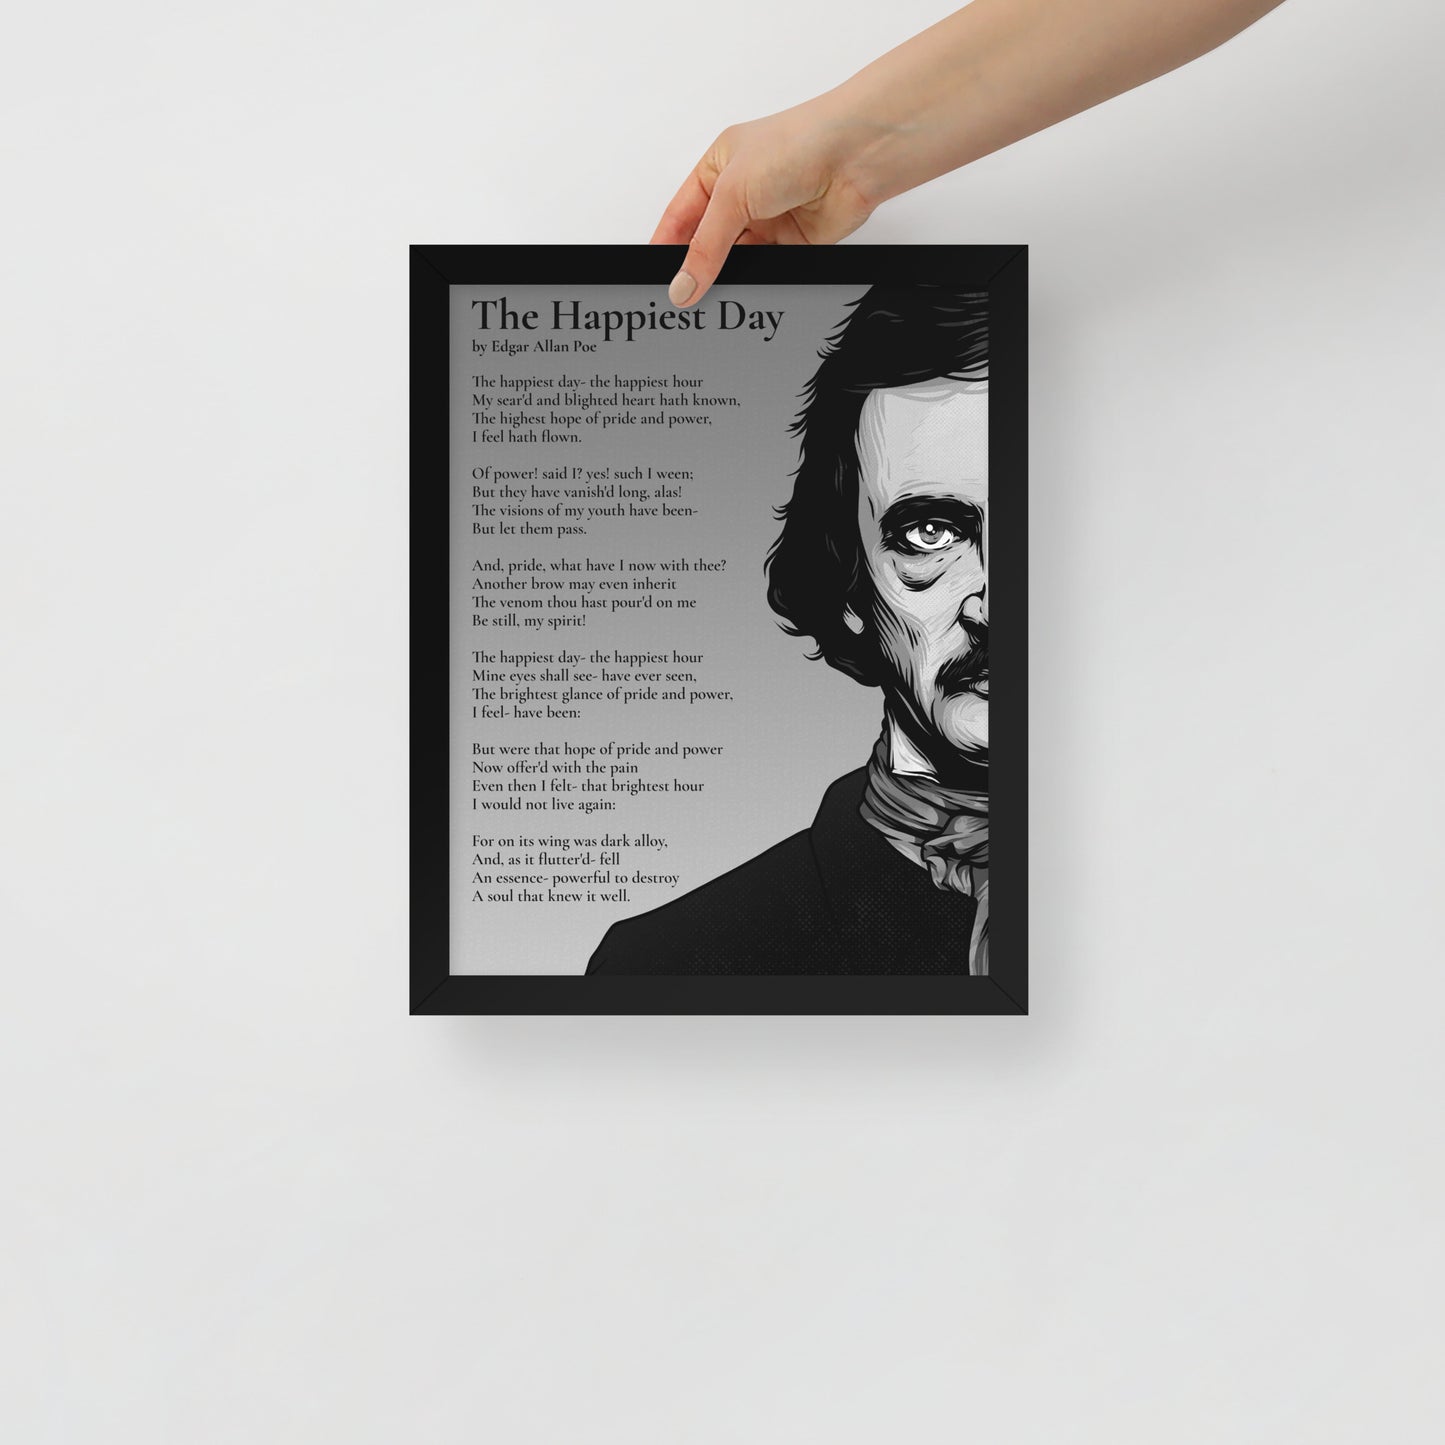 Edgar Allan Poe's 'The Happiest Day' Framed Matted Poster - 11 x 14 Black Frame